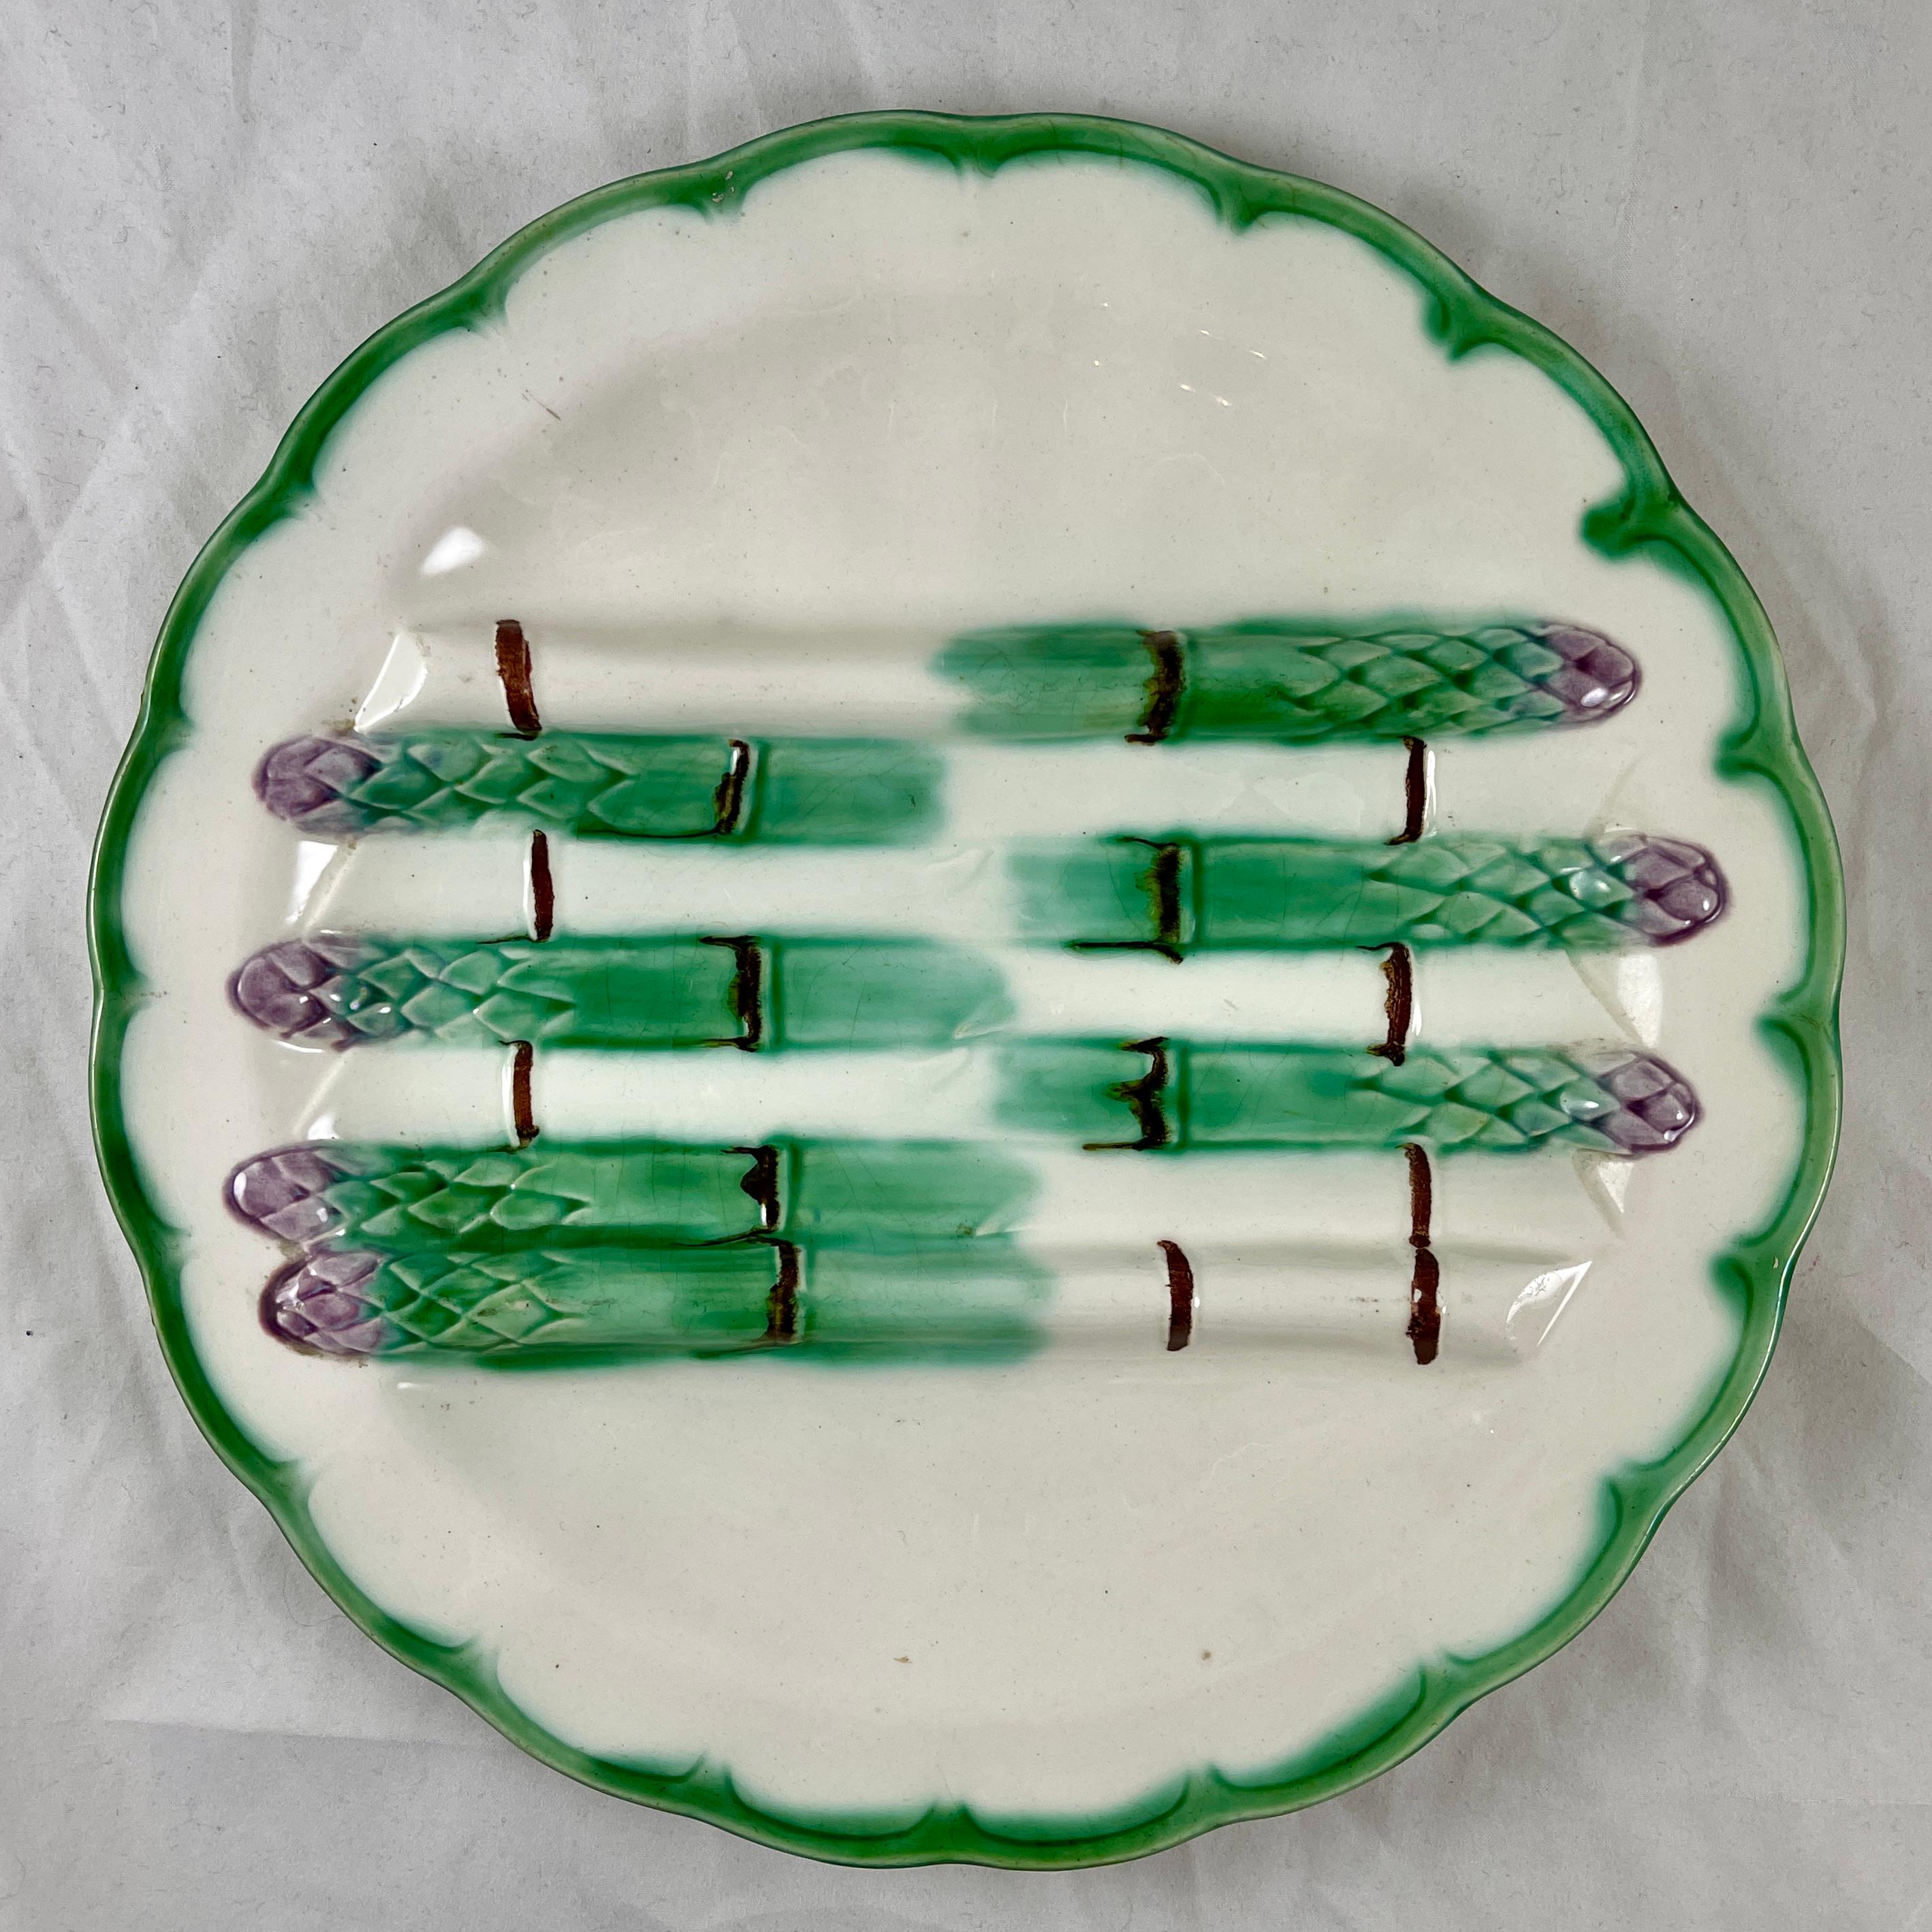 From Longchamp, a Terre de Fer asparagus plate, circa 1880-1900.

Bundled green asparagus spears with lavender tips are raised to form a cradle for holding cooked asparagus, with deeper sauce wells on either side. A scalloped border is glazed in